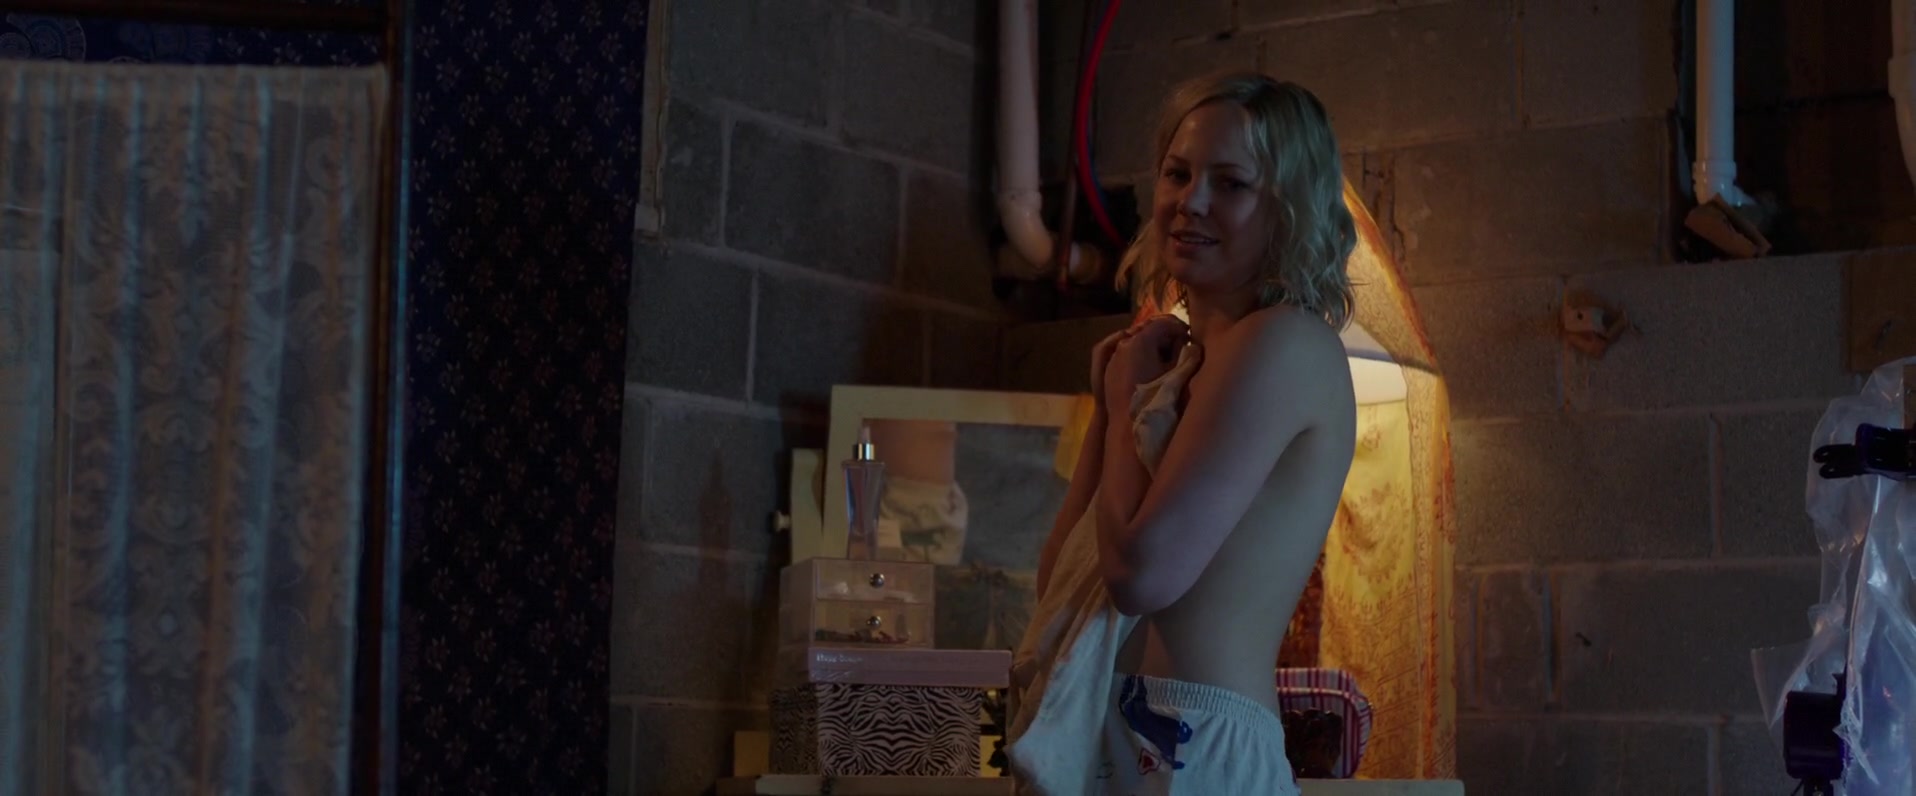 Adelaide Clemens - The Automatic Hate (2015) celeb topless s